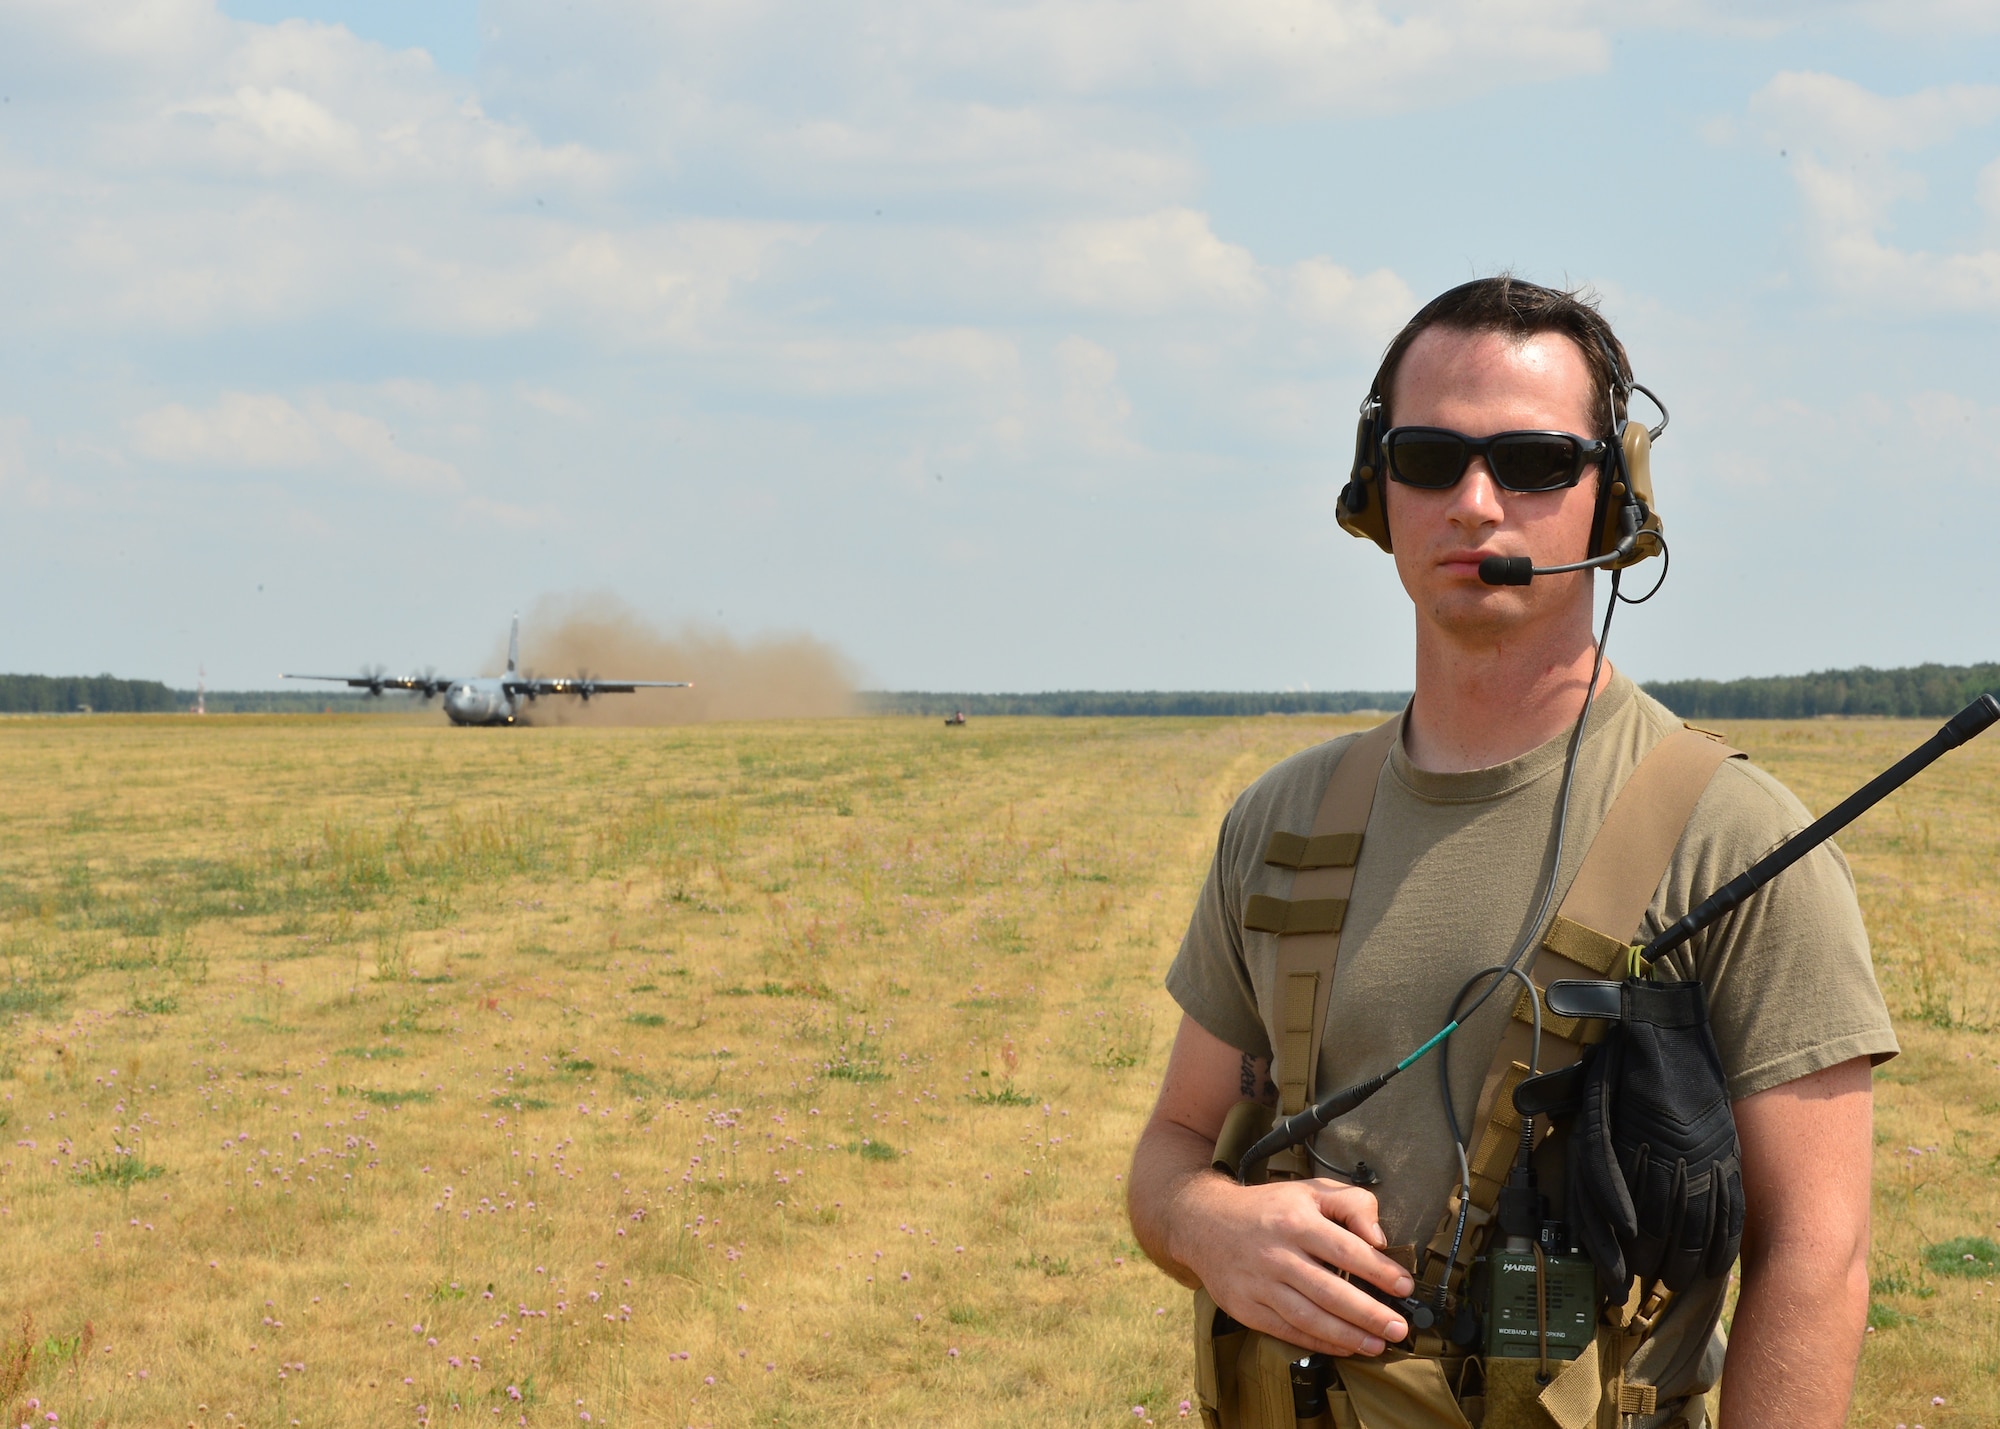 U.S. Air Force Staff Sgt. David Valine, 435th Contingency Response Squadron landing zone safety officer, provides control support for Airmen deployed in support of Aviation Rotation 19-3 at Powidz Air Base, Poland, July 20, 2019. Landing zone safety officers set up landing strips, communicate with incoming aircraft, and ensure the integrity of the landing area for a safe arrival of aircraft. (U.S. Air Force photo by Staff Sgt. Jimmie D. Pike)